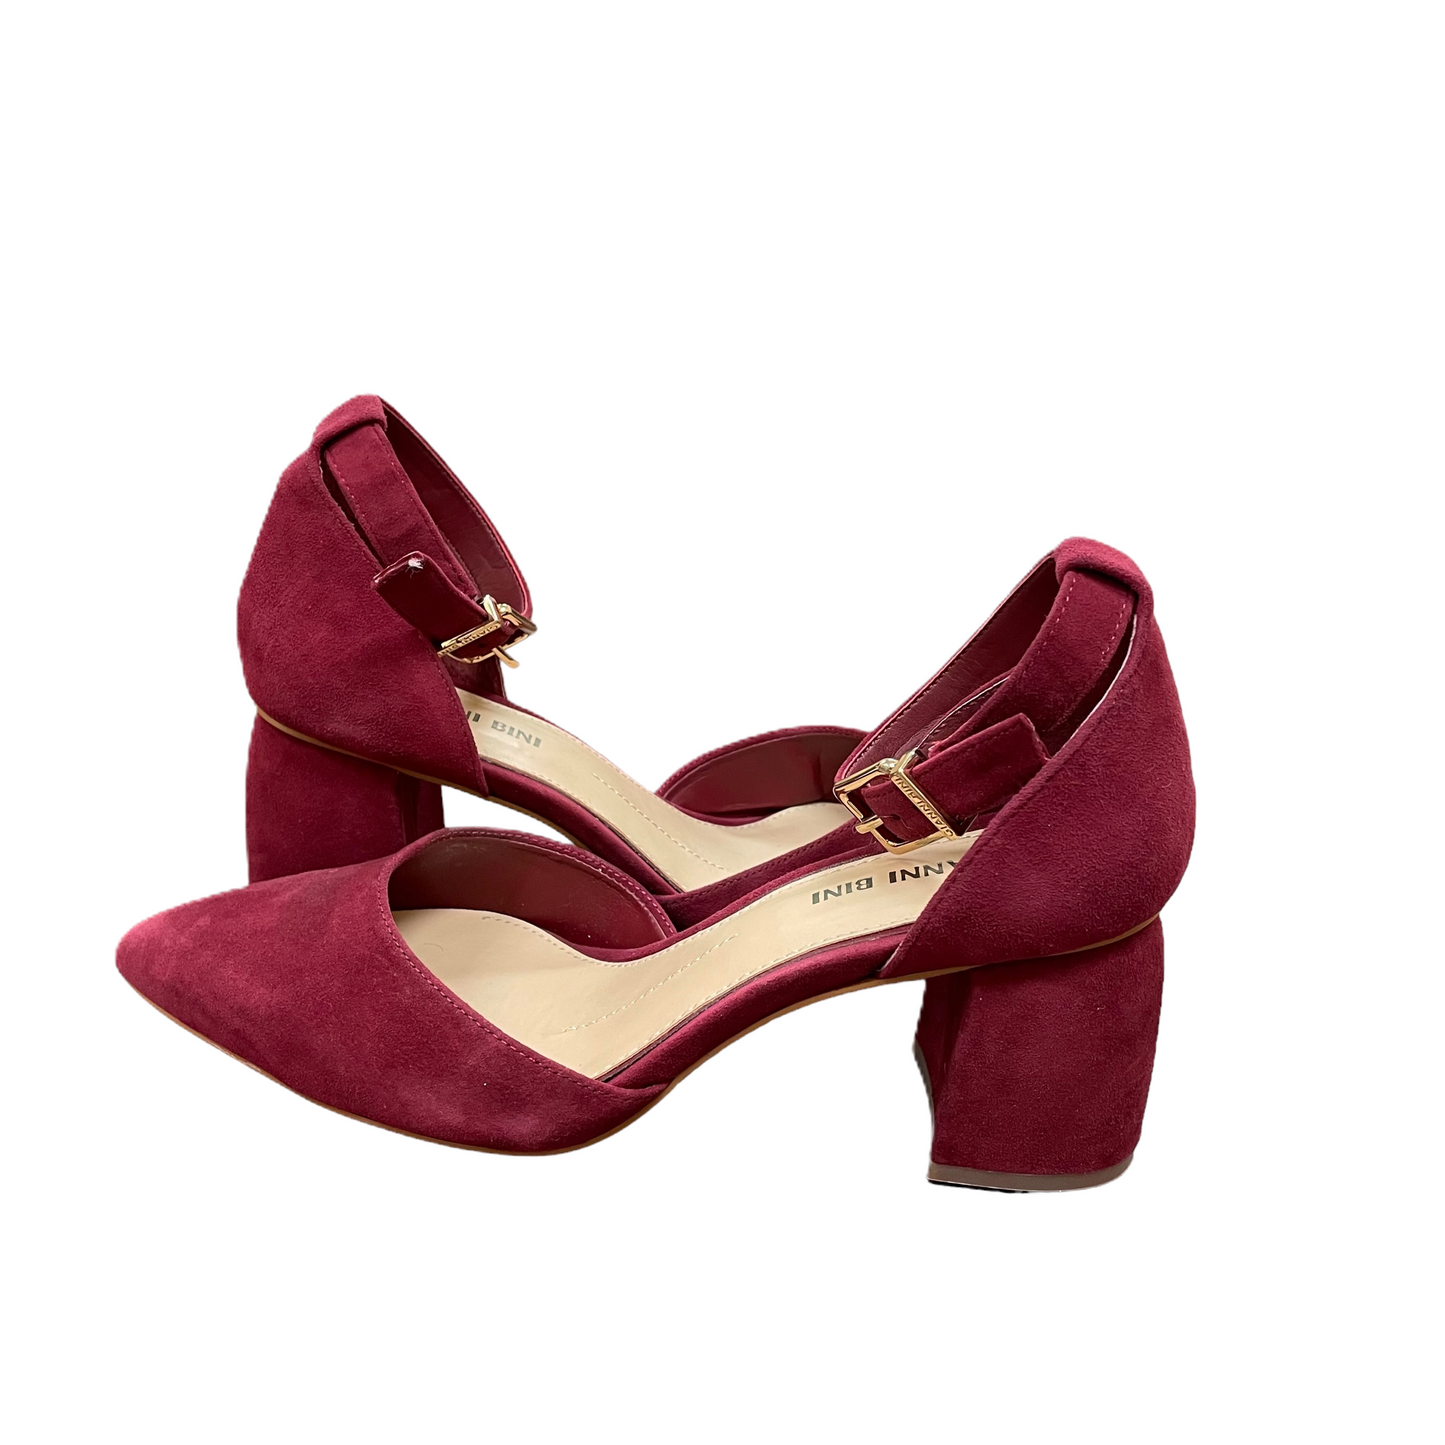 Red Shoes Heels Block By Gianni Bini, Size: 8.5